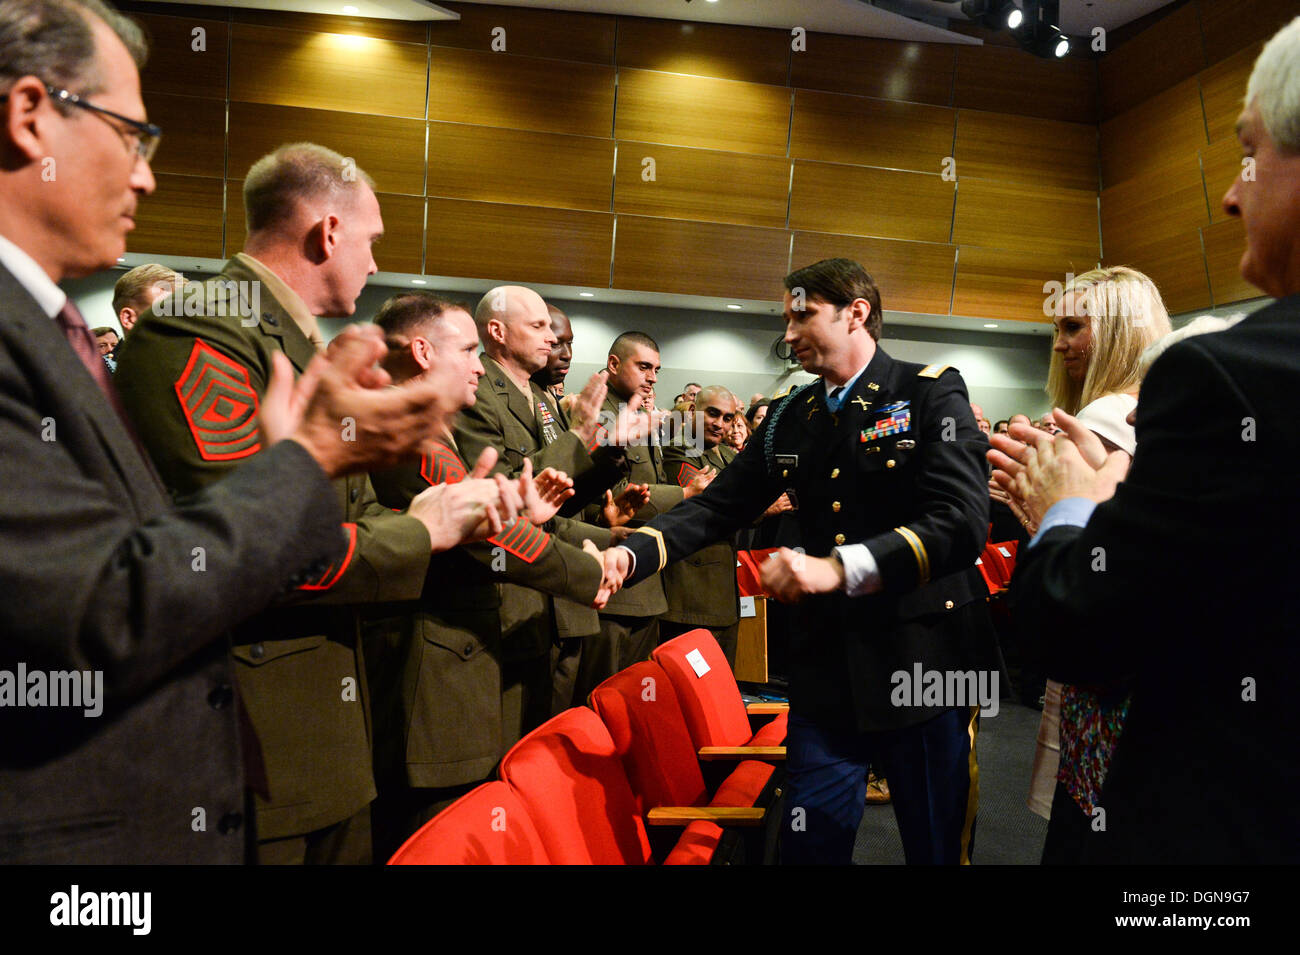 Former U.S. Army Capt. William D. Swenson, a Medal of Honor recipient, shakes hands with members of his team during the battle of Ganjgal at his Hall of Heroes Induction ceremony at the Pentagon in Washington, D.C., Oct 16, 2013. Stock Photo